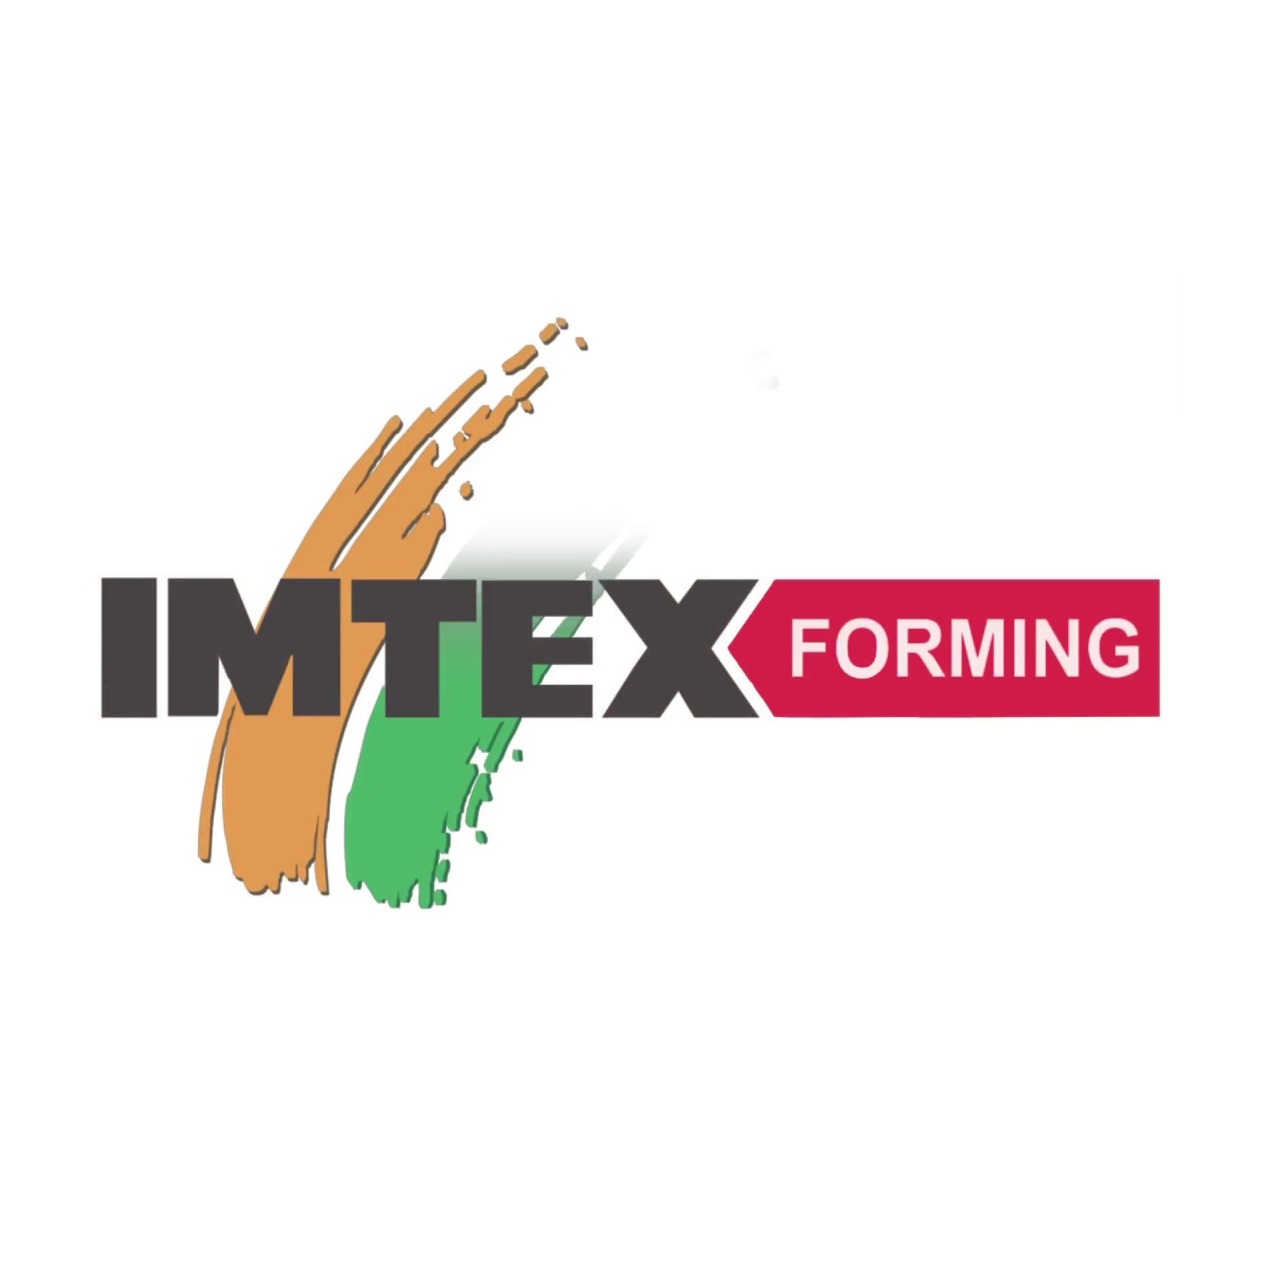 2020 IMTEX Forming&Tooltech (IMTEX Forming)